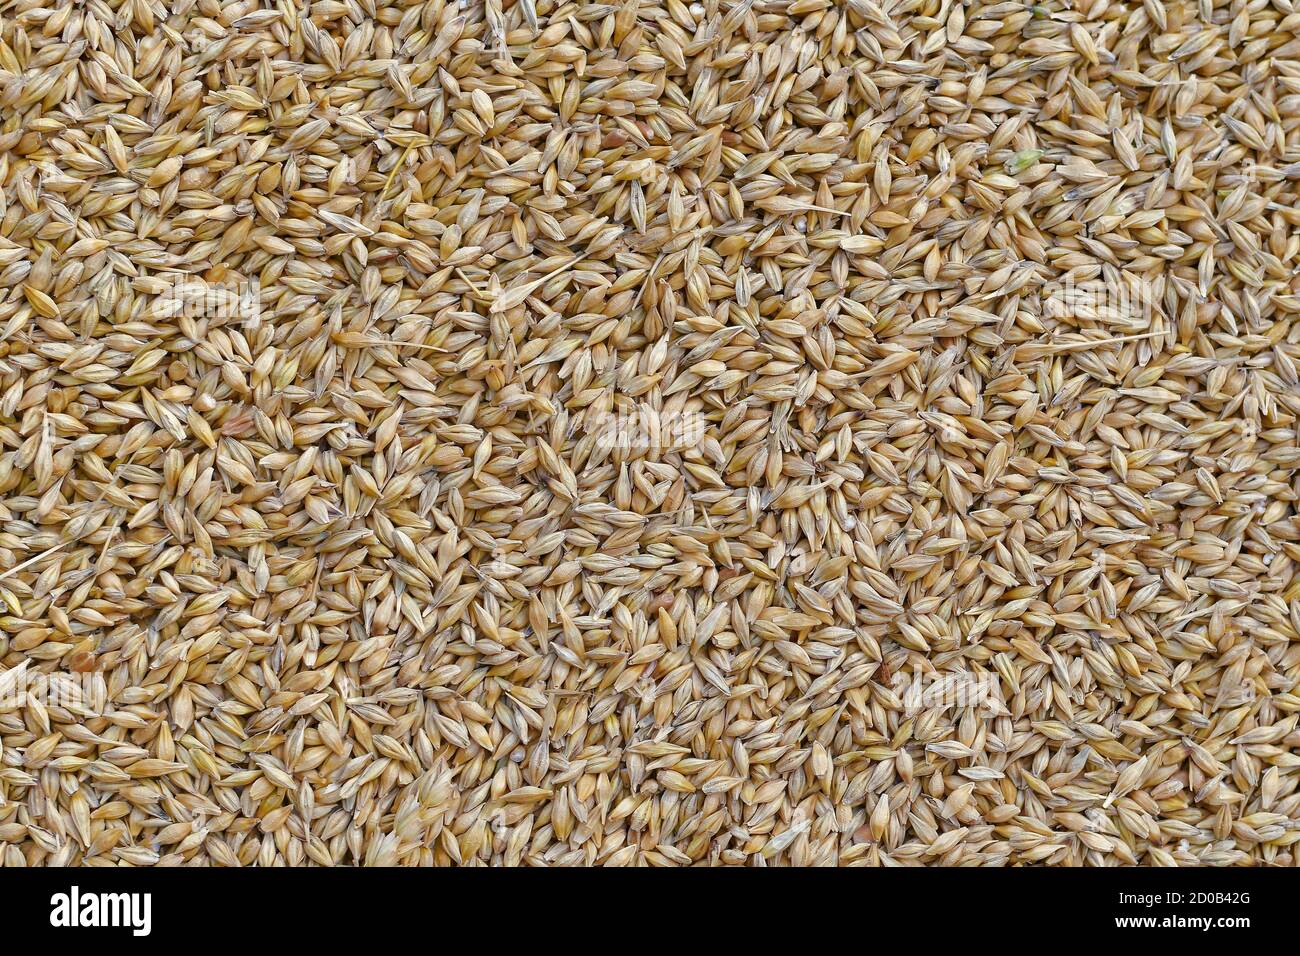 Unprocessed barley grains in husk, in large quantities. Stock Photo